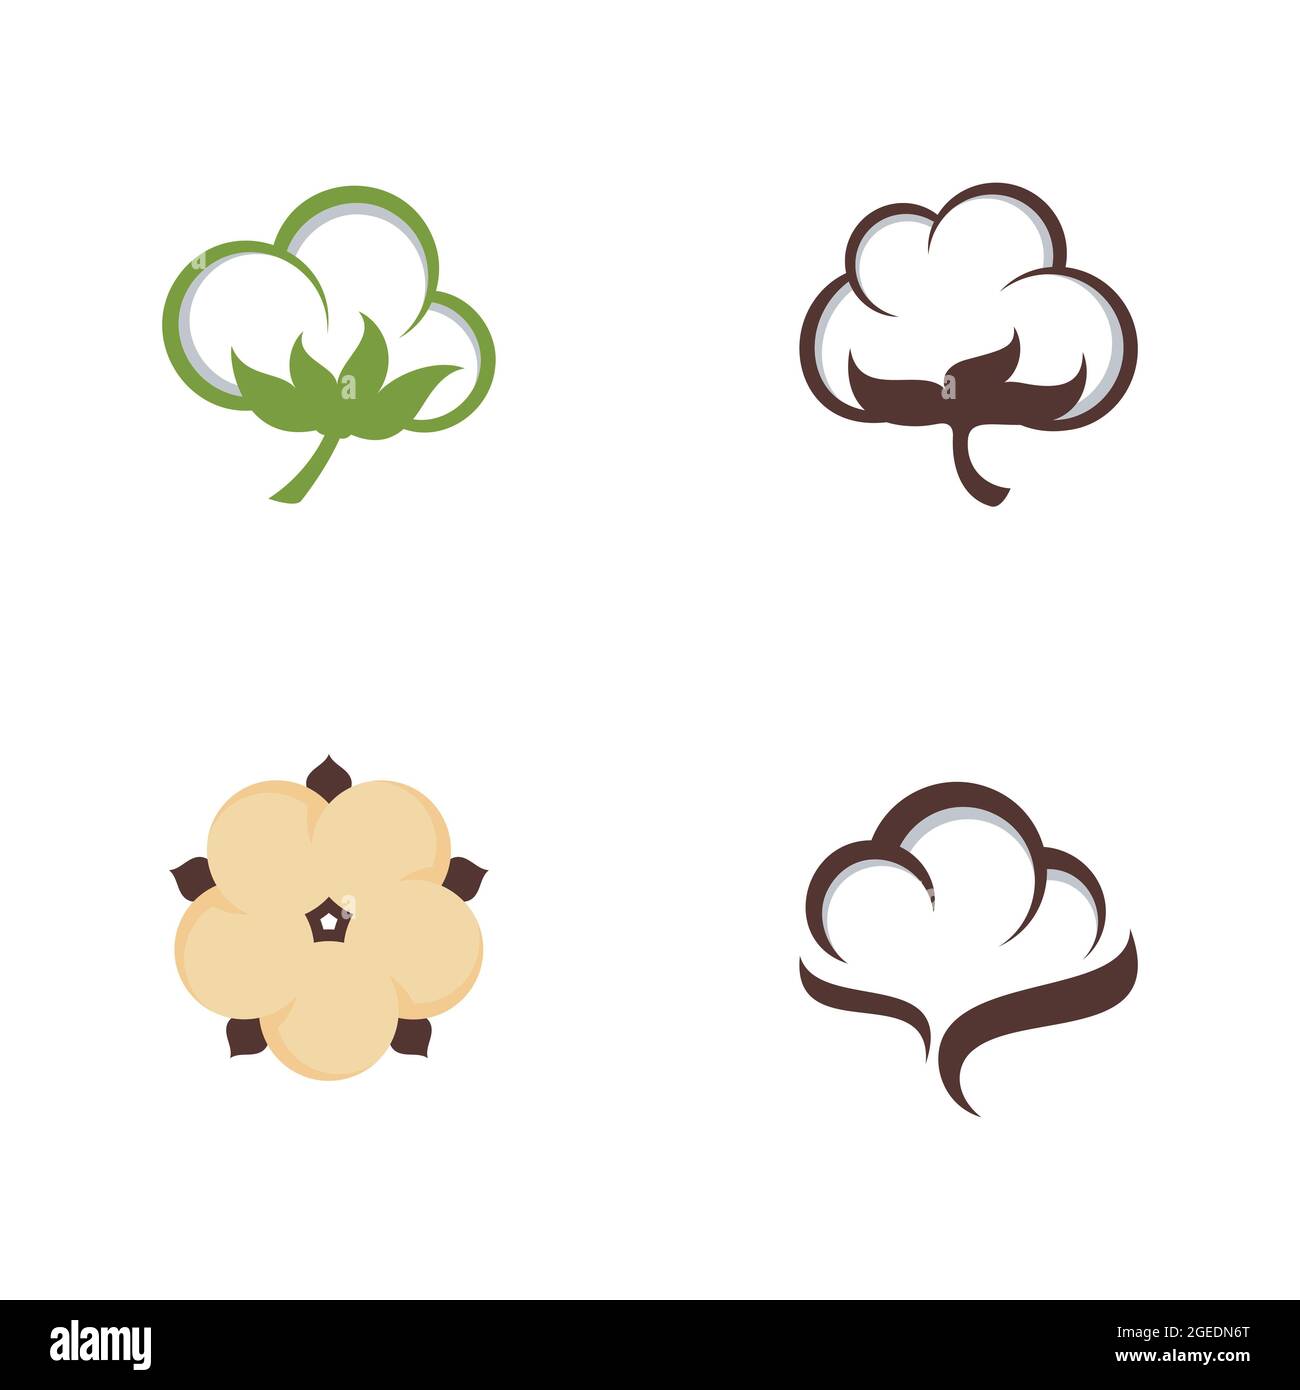 Cotton flower vector icon template symbol nature Stock Photo - Alamy